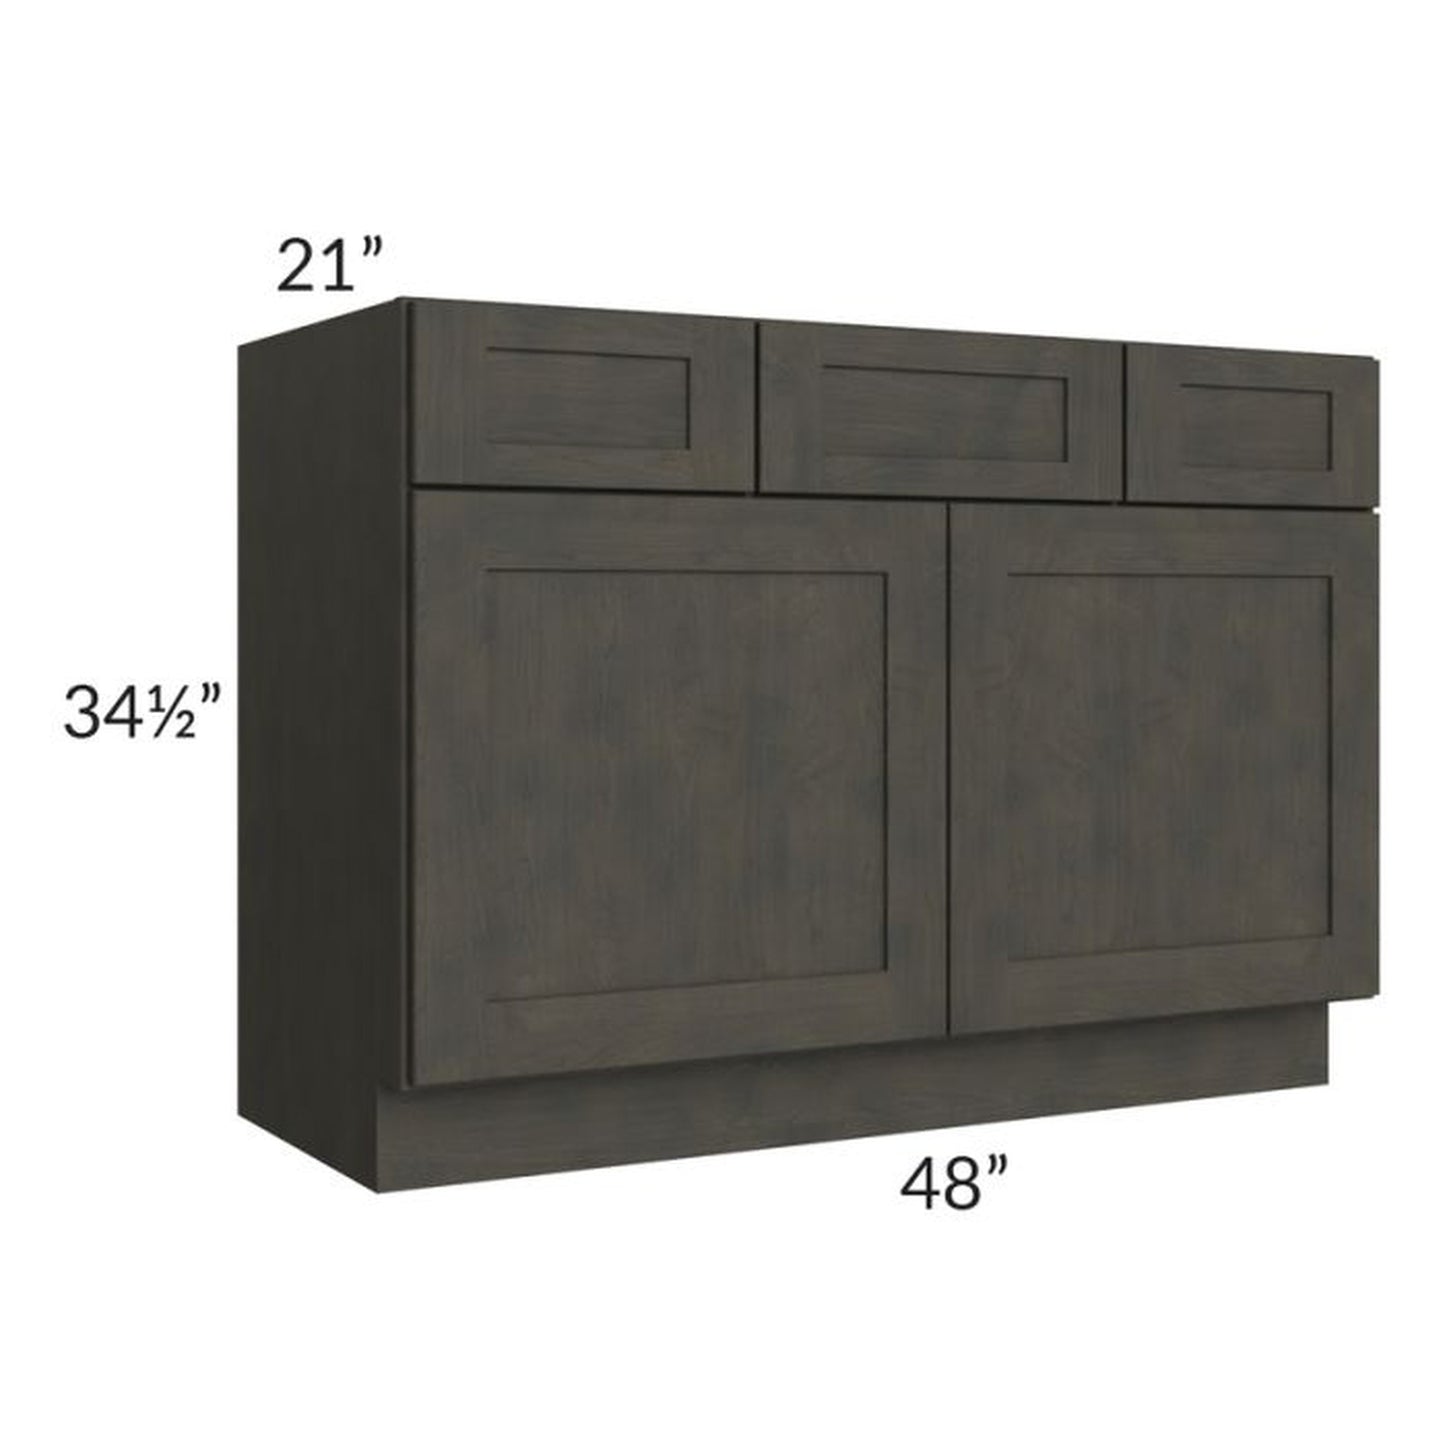 RTA Charcoal Grey Shaker 48" Vanity Base Cabinet with 2 Decorative End Panels